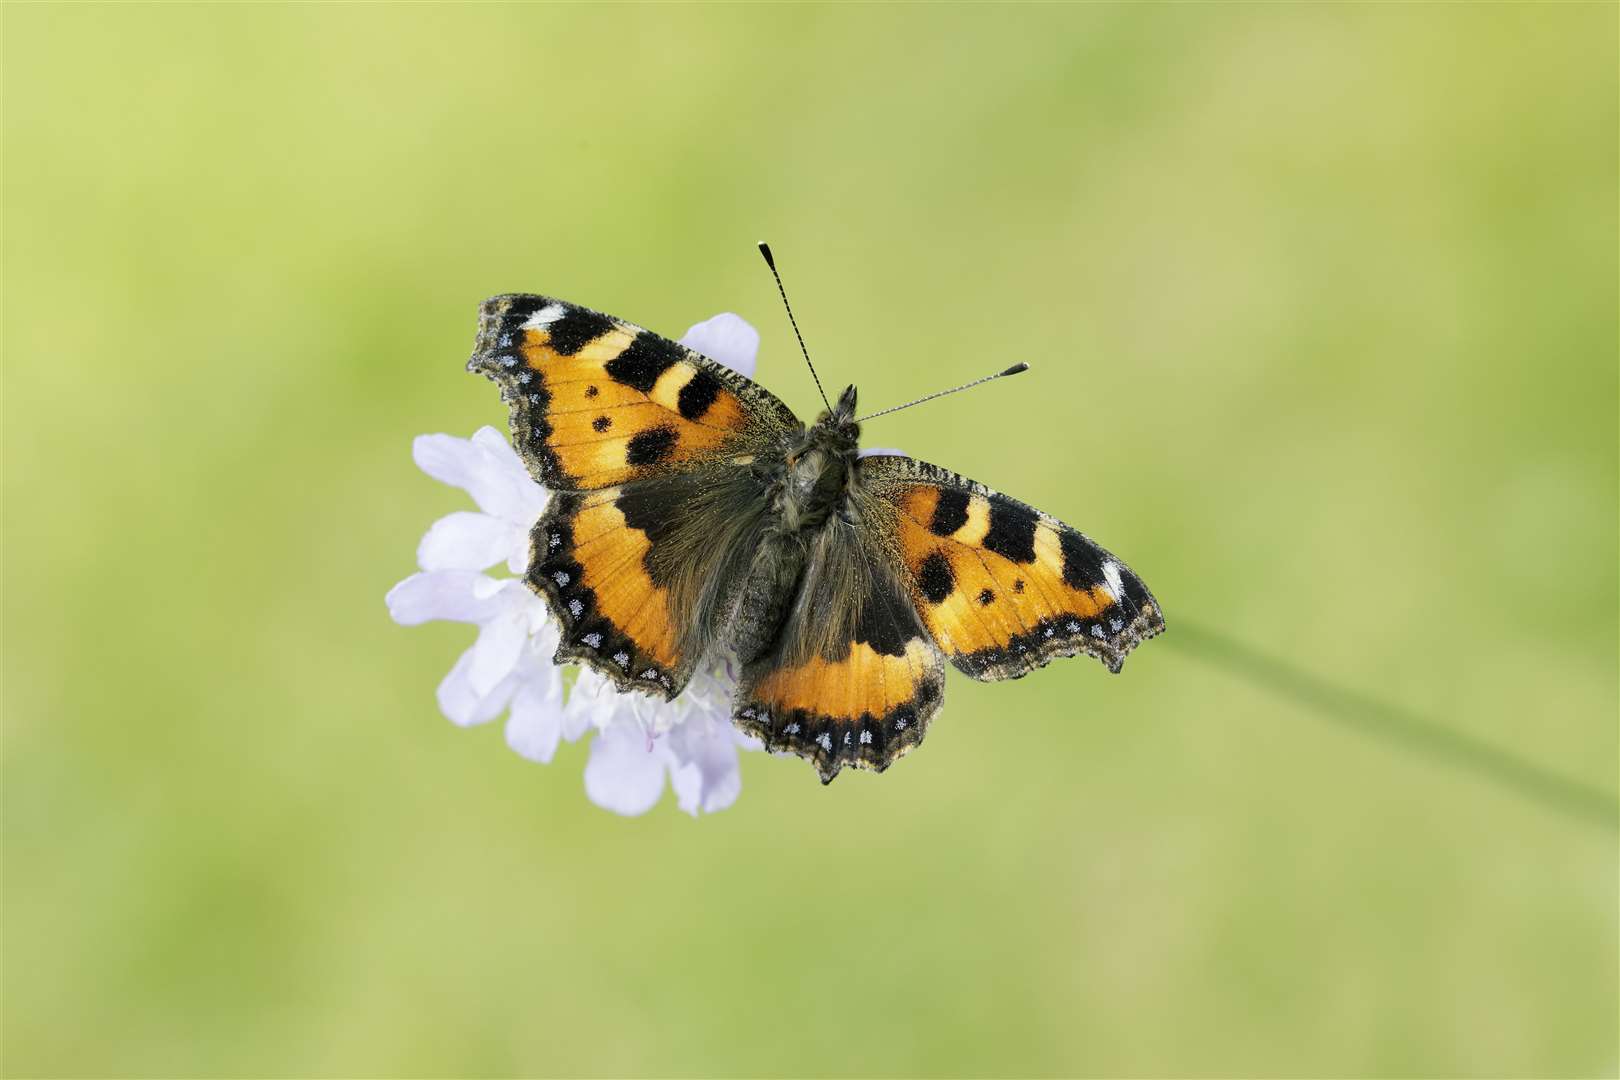 People have been encouraged to get involved with the Big Butterfly Count.